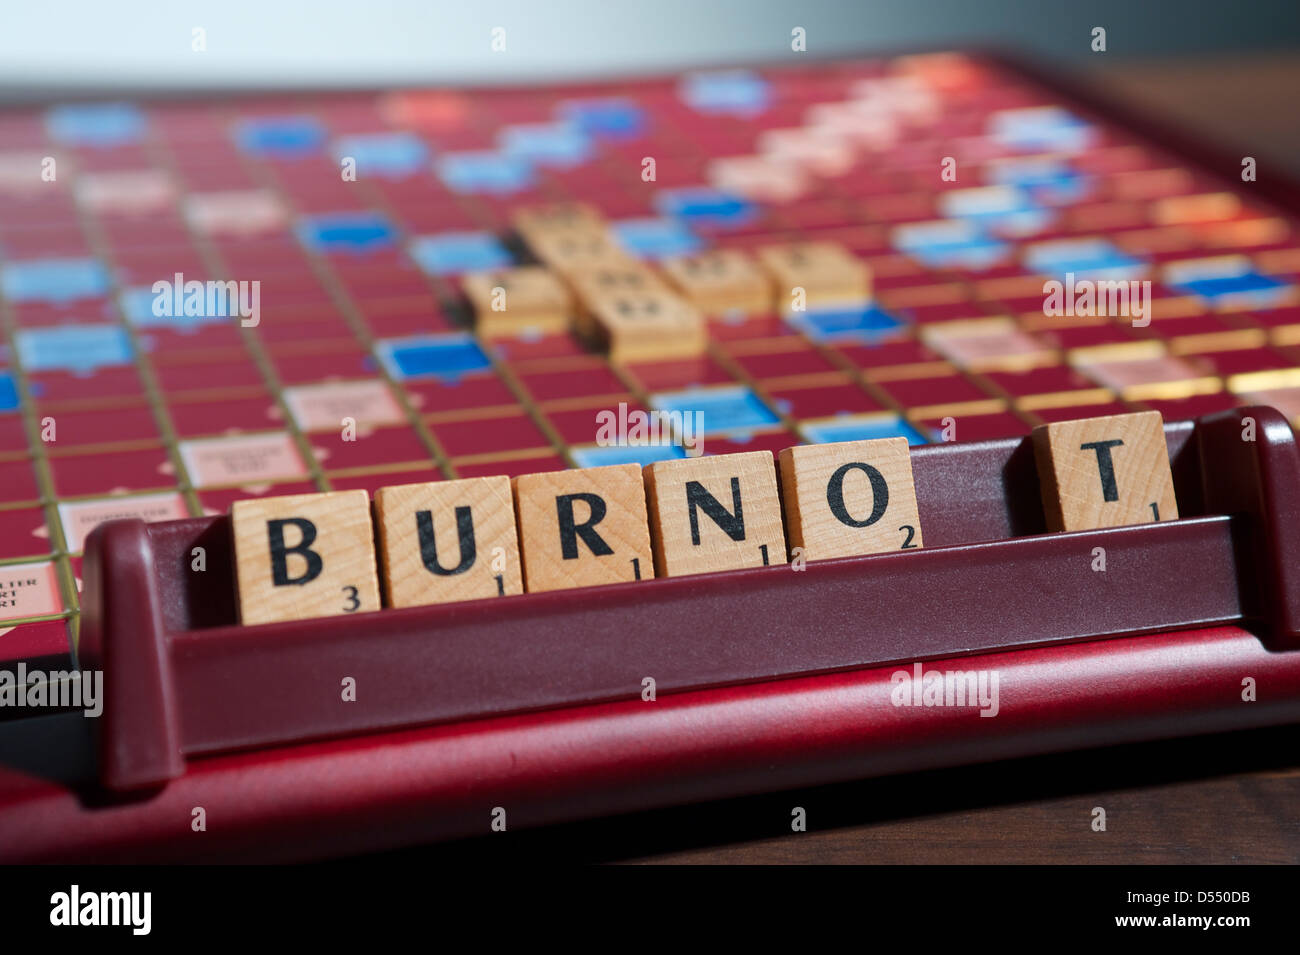 Hamburg, Germany, Scrabble letters form the word Burno T Stock Photo